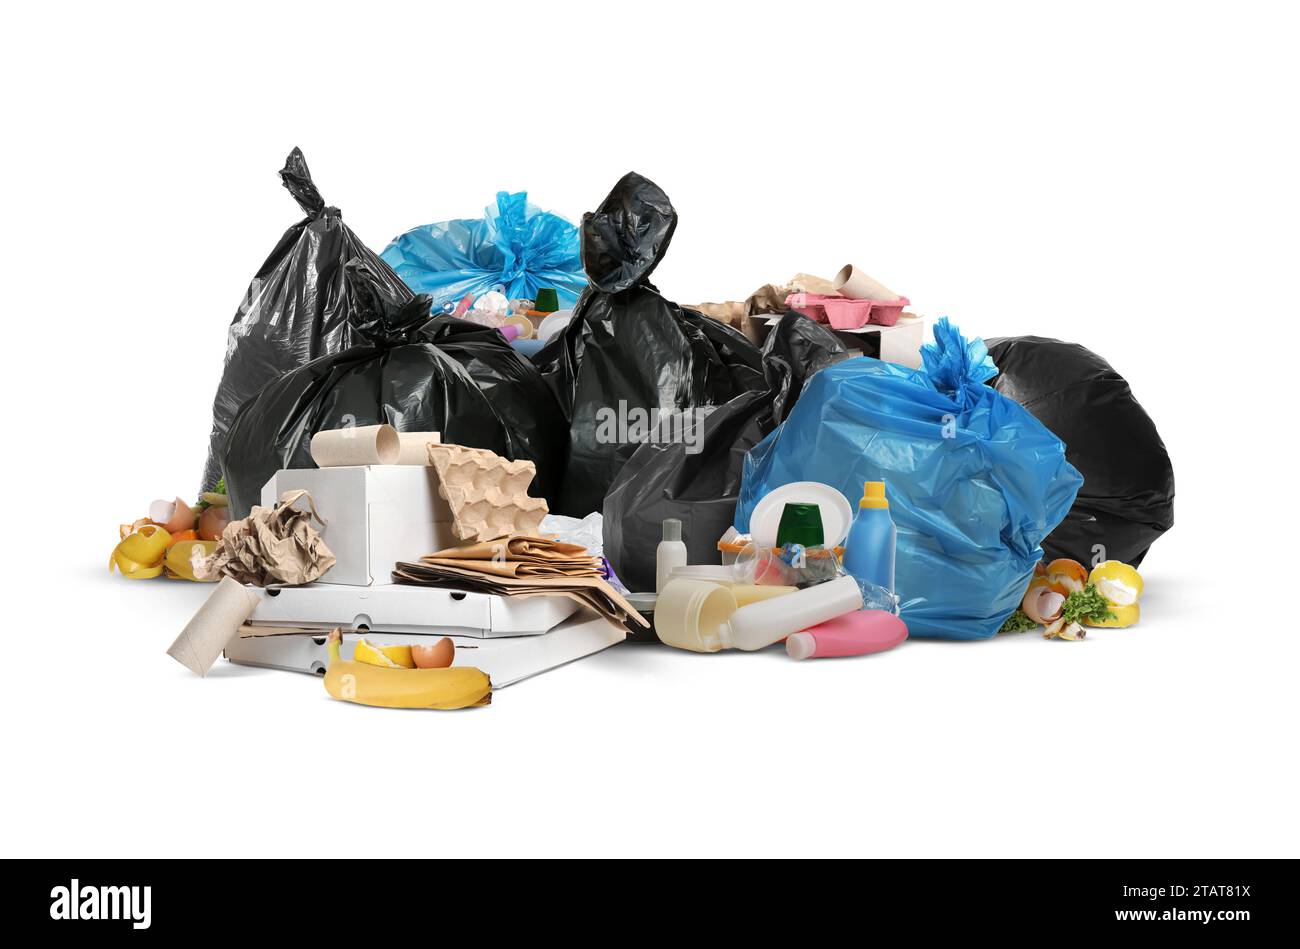 https://c8.alamy.com/comp/2TAT81X/environment-garbage-and-pile-of-plastic-bags-on-white-background-2TAT81X.jpg